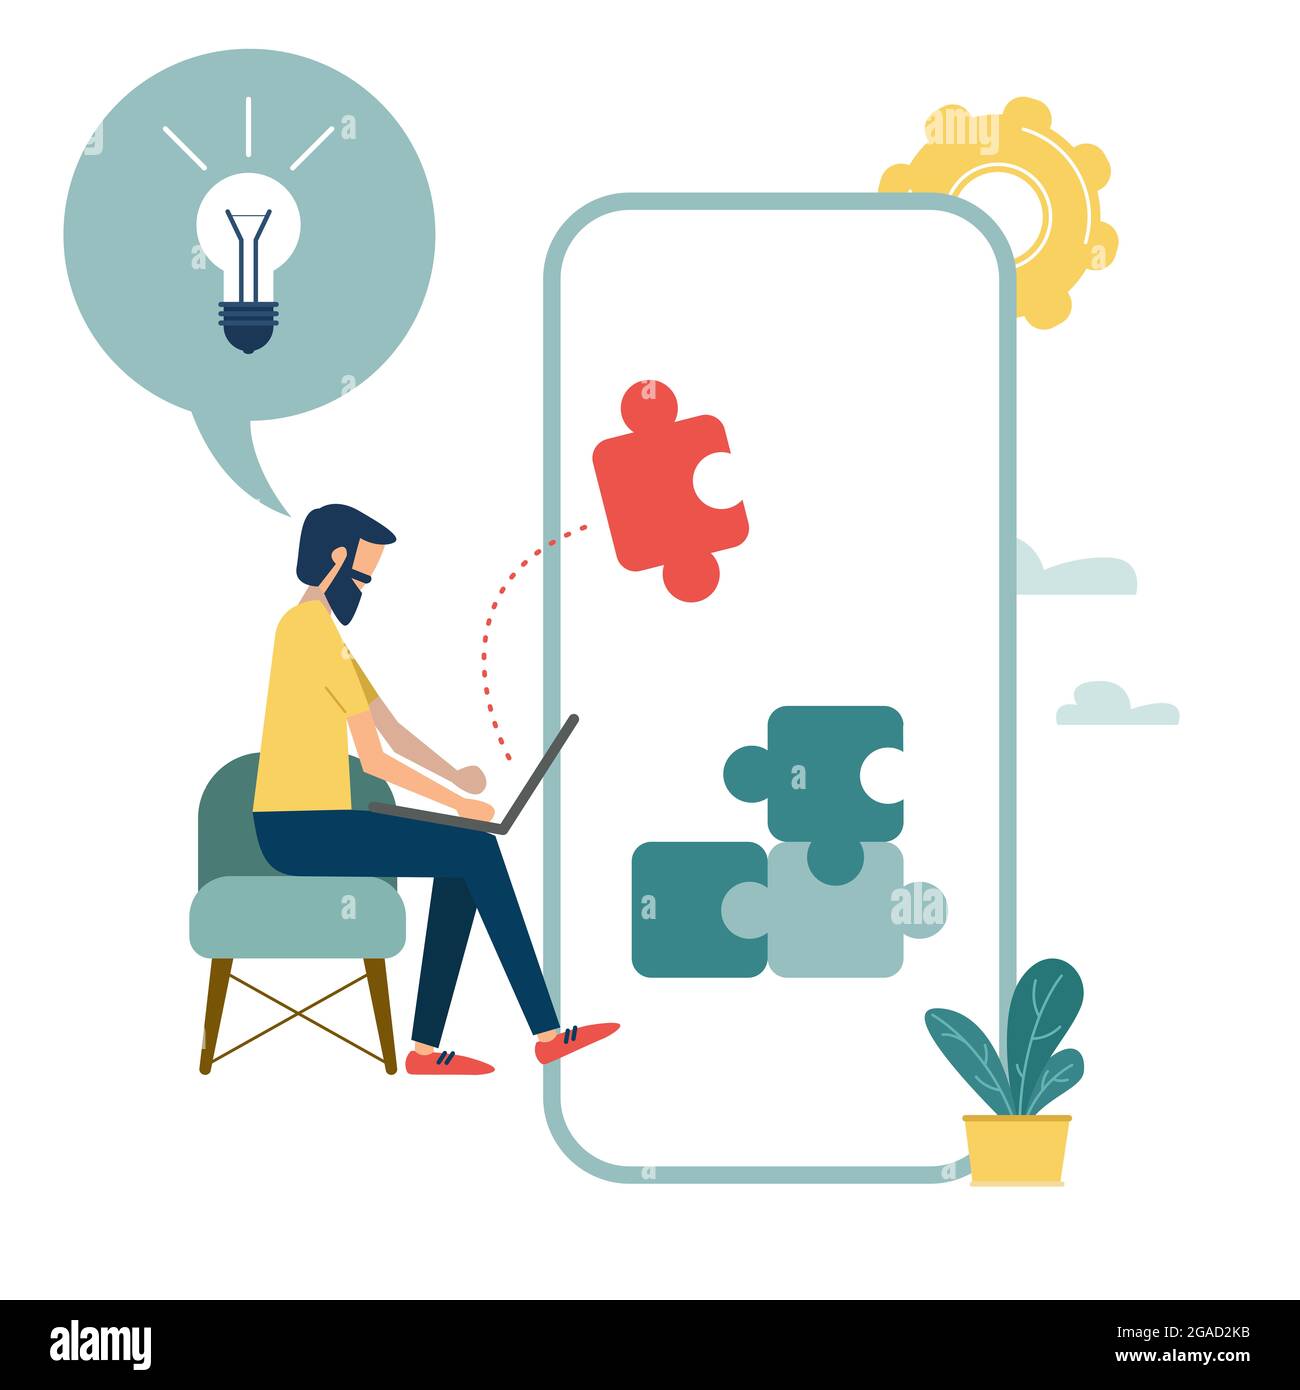 Сoncept of solving business problems. Abstract head of person filled with new ideas thoughts vector. Brainstorming, beginning and end to thought. Stock Photo